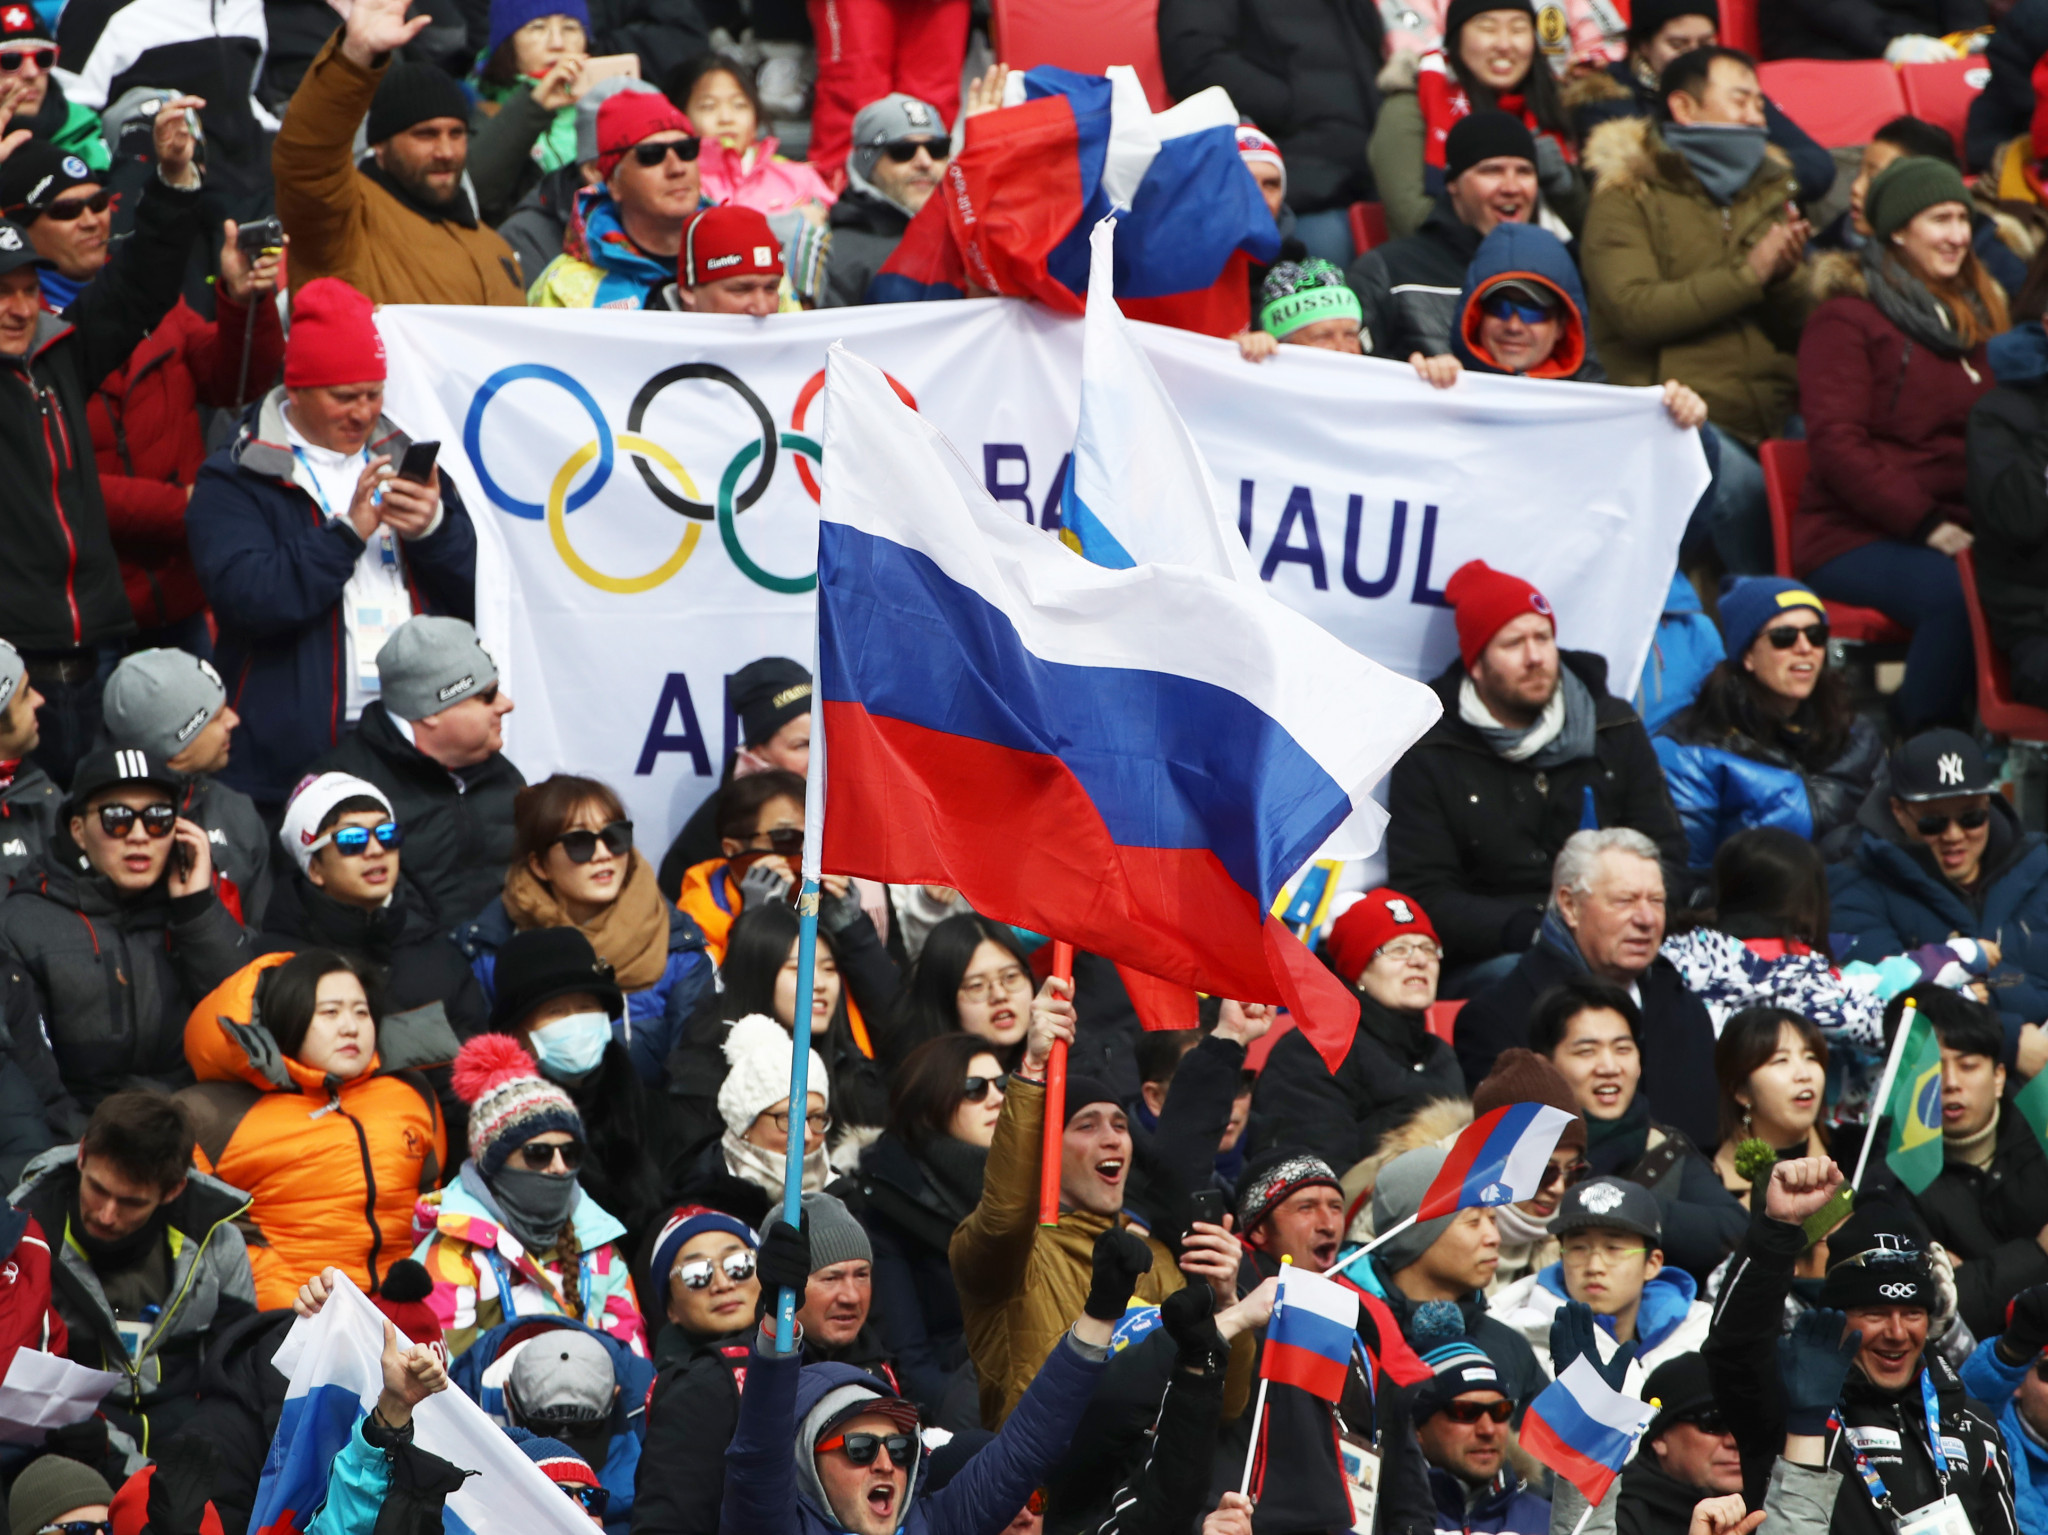 Russia faces being banned again by WADA ©Getty Images